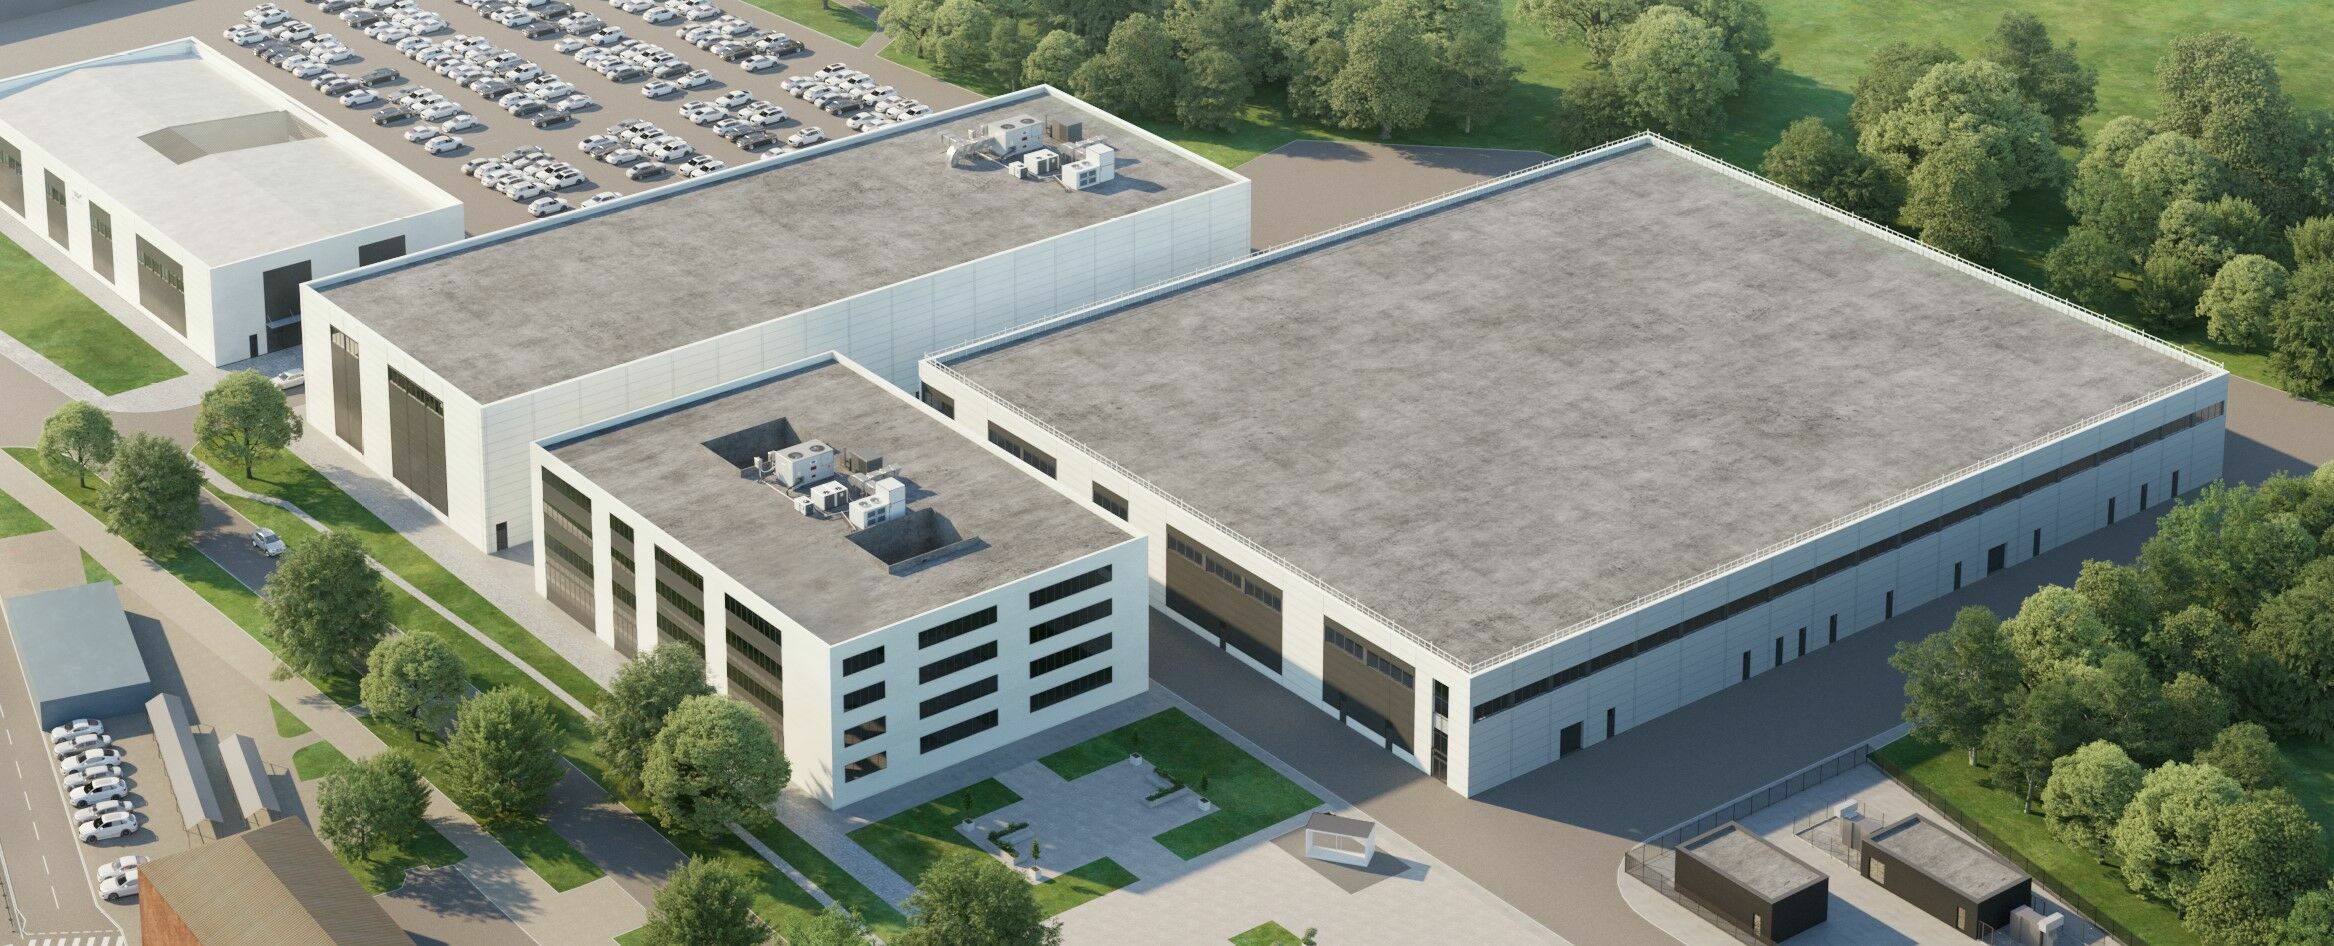 Bentley breaks ground on new Launch Quality Centre and Engineering Technical Centre